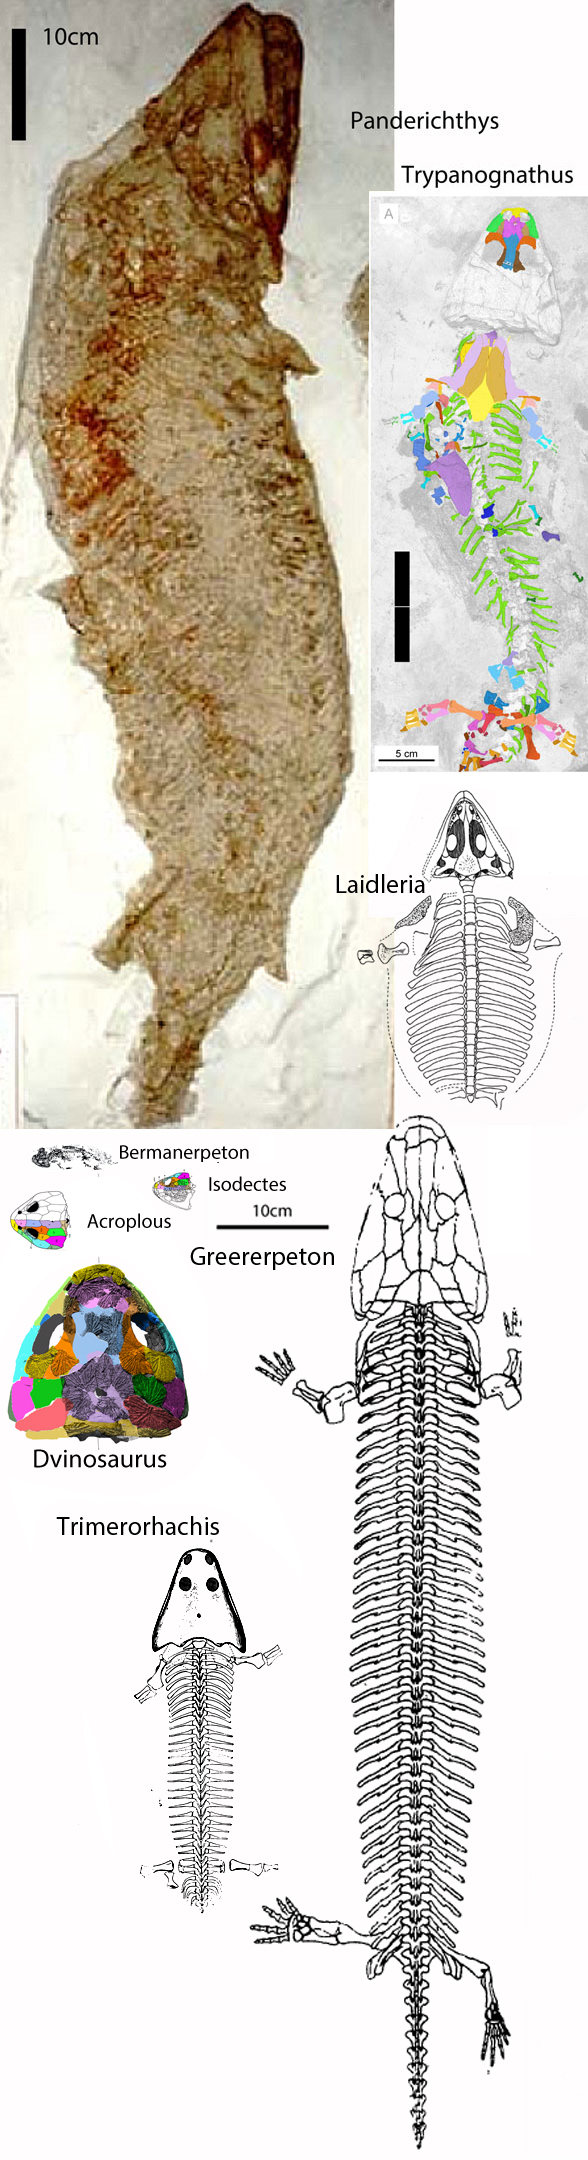 Figure 1. Vertebrates at the transition from stem-tetrapod to tetrapod in the LRT. Trypanognathus is the most primitive known tetrapod in the LRT, despite its late appearance in the latest Carboniferous.